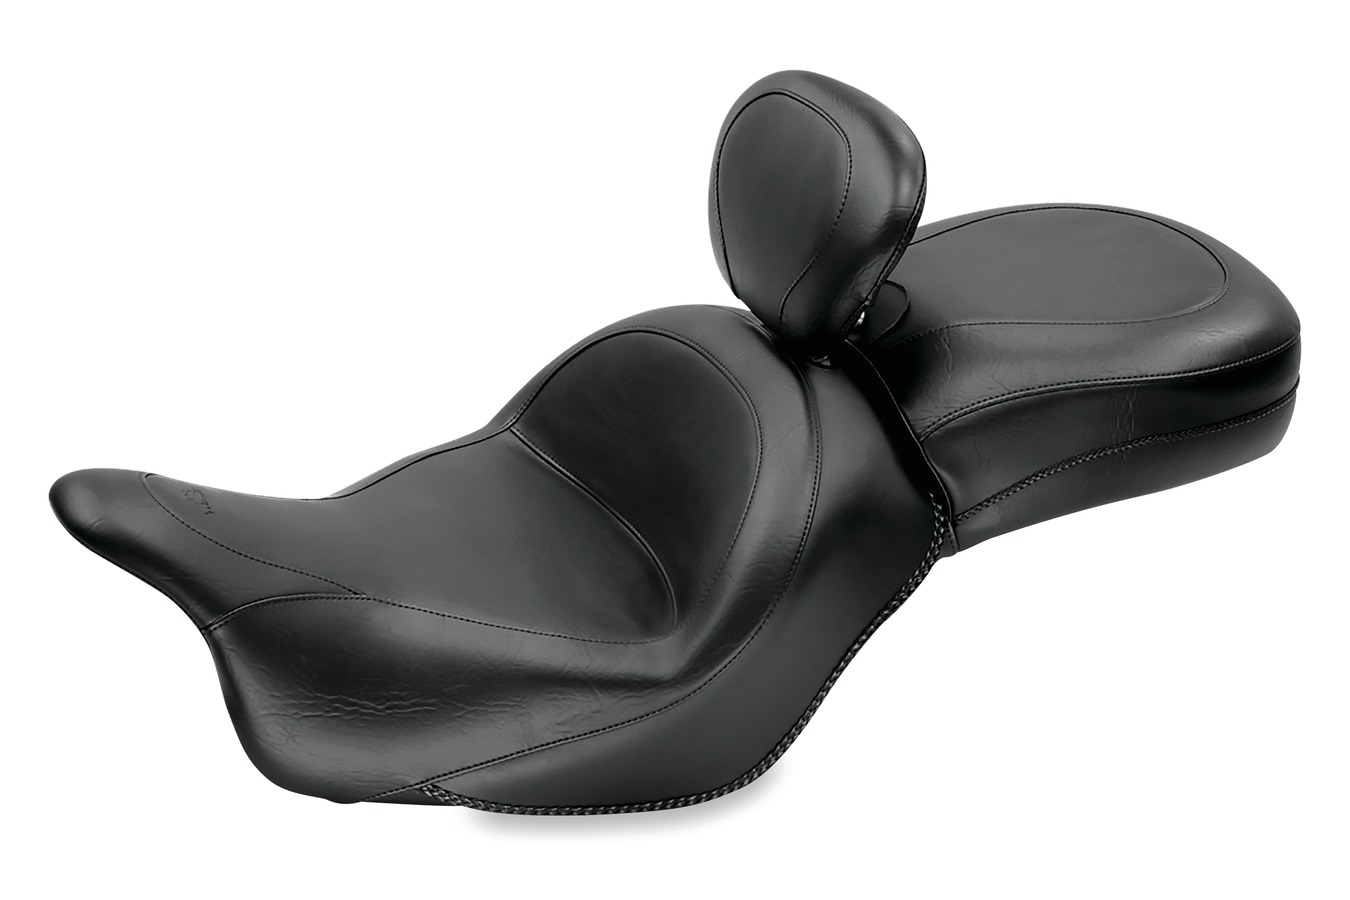 Standard Touring One-Piece Seat with Driver Backrest for Kawasaki Vulcan 1700 Classic 2009-